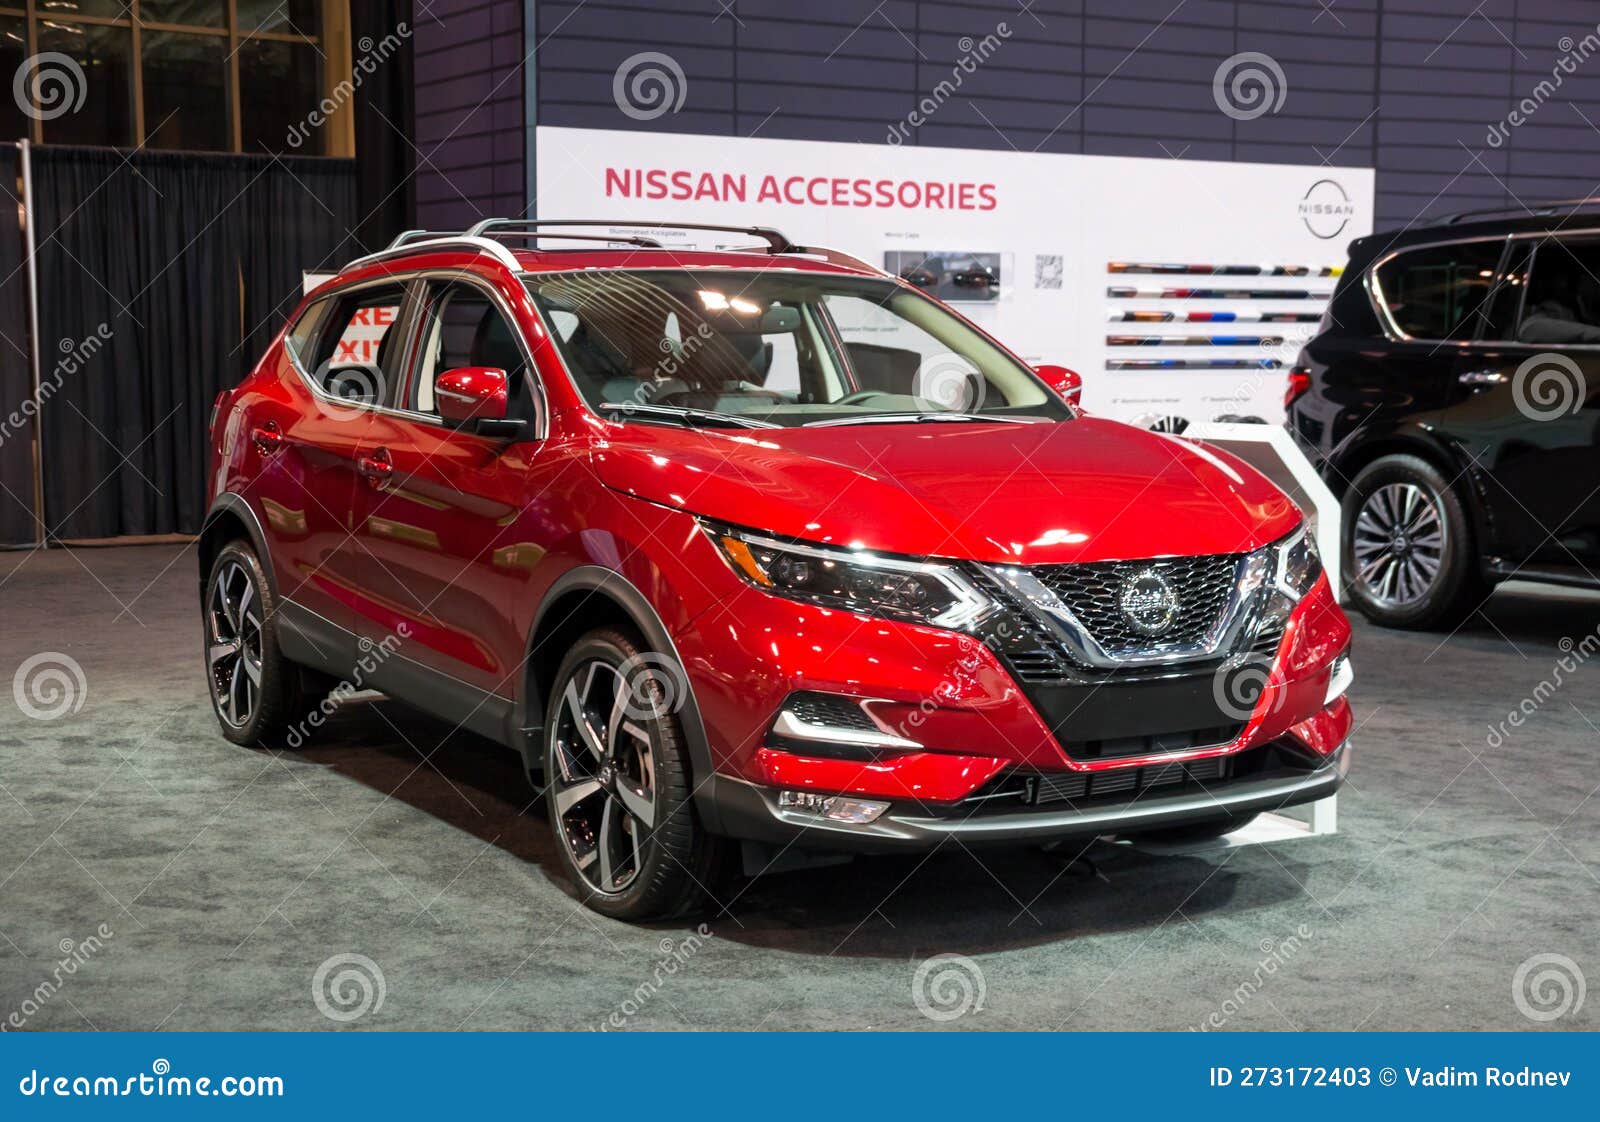 https://thumbs.dreamstime.com/z/toronto-canada-red-nissan-qashqai-j-compact-crossover-suv-produced-japanese-car-manufacturer-nissan-motor-corporation-displayed-273172403.jpg